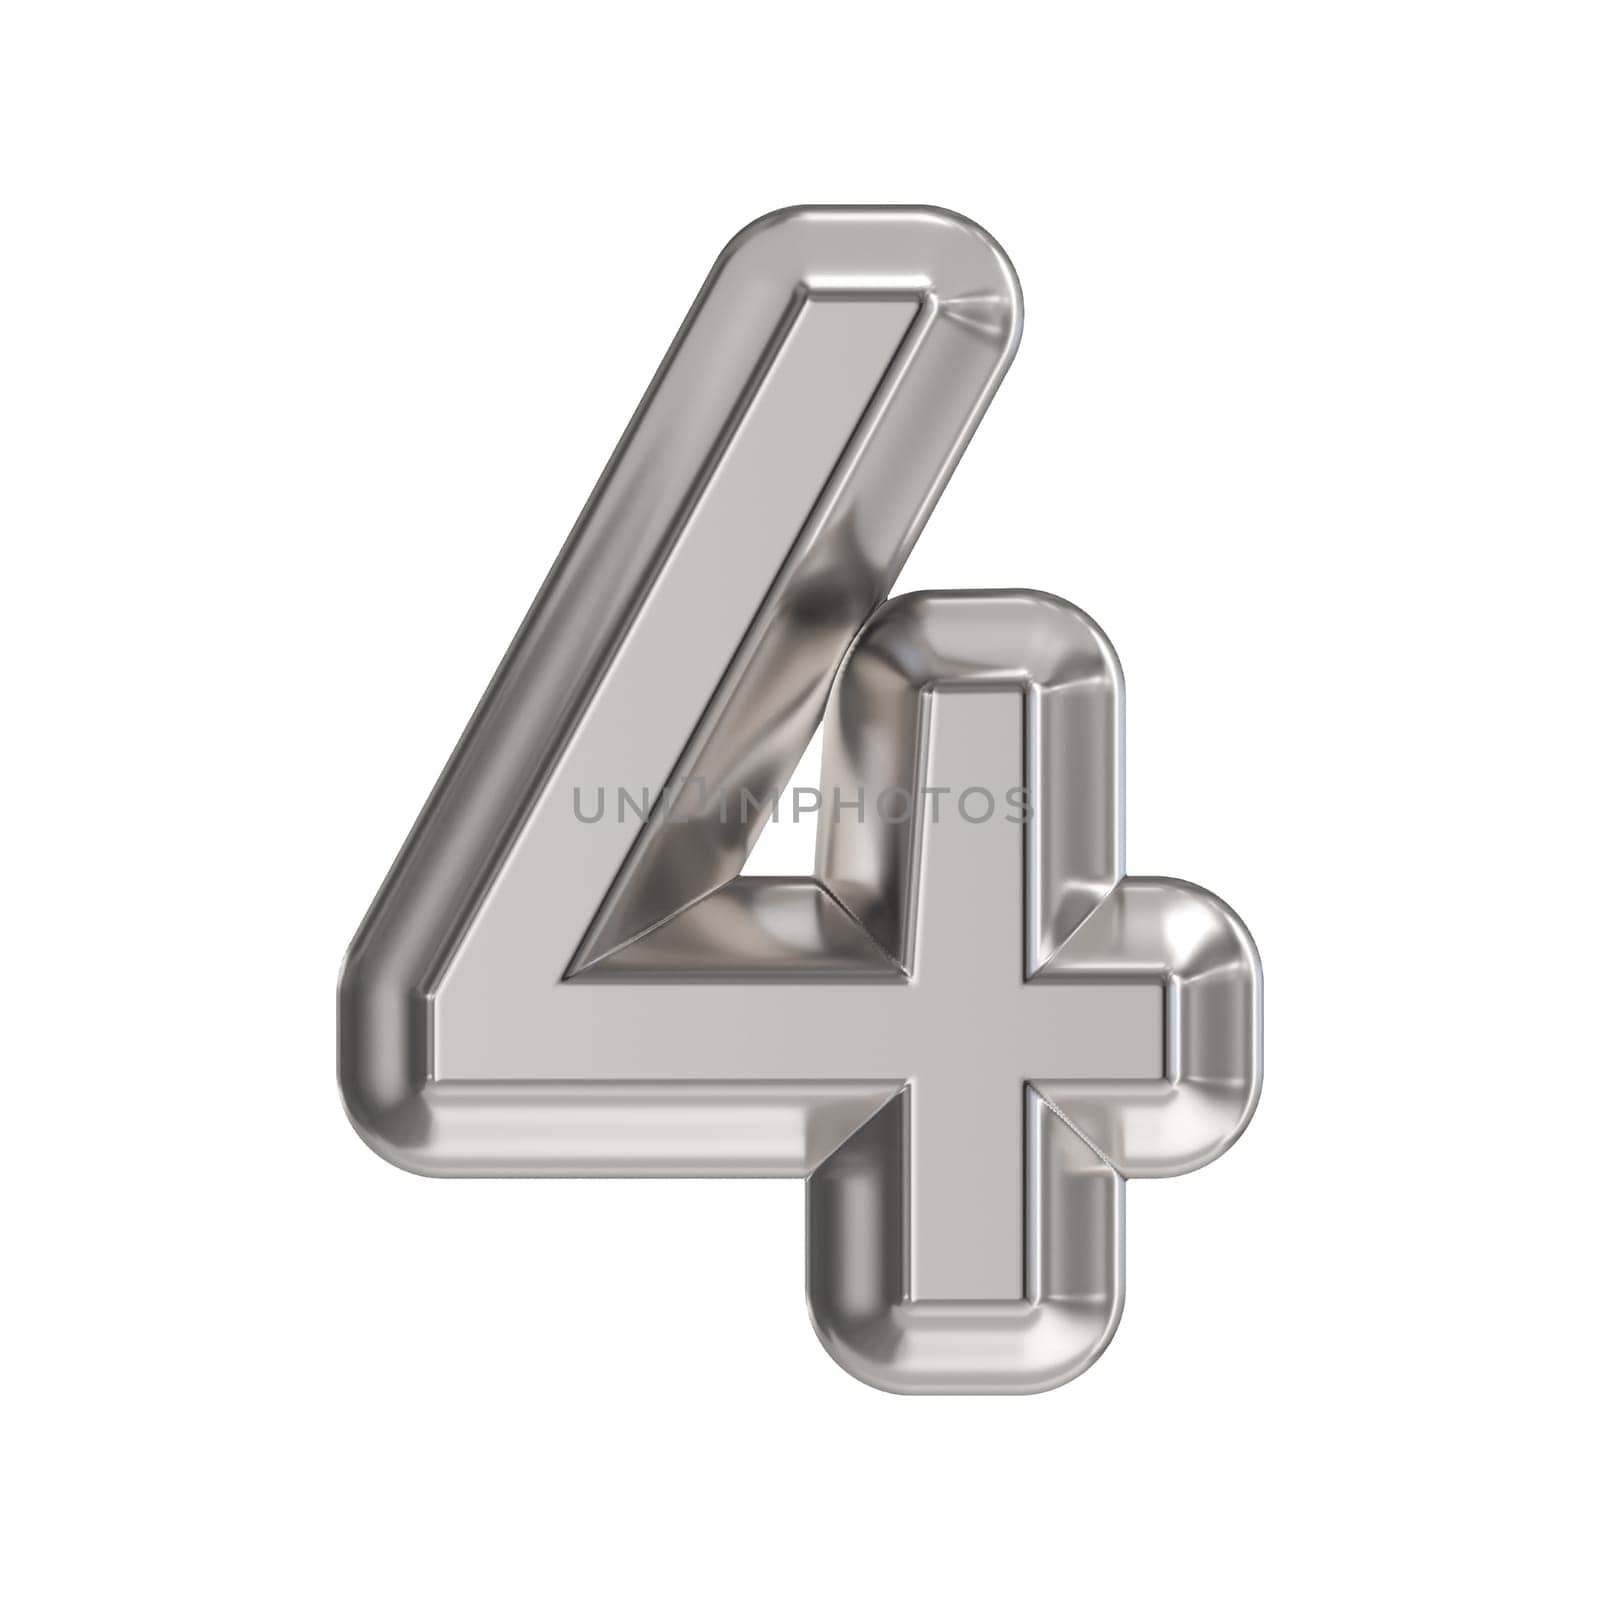 Steel font Number 4 FOUR 3D rendering illustration isolated on white background